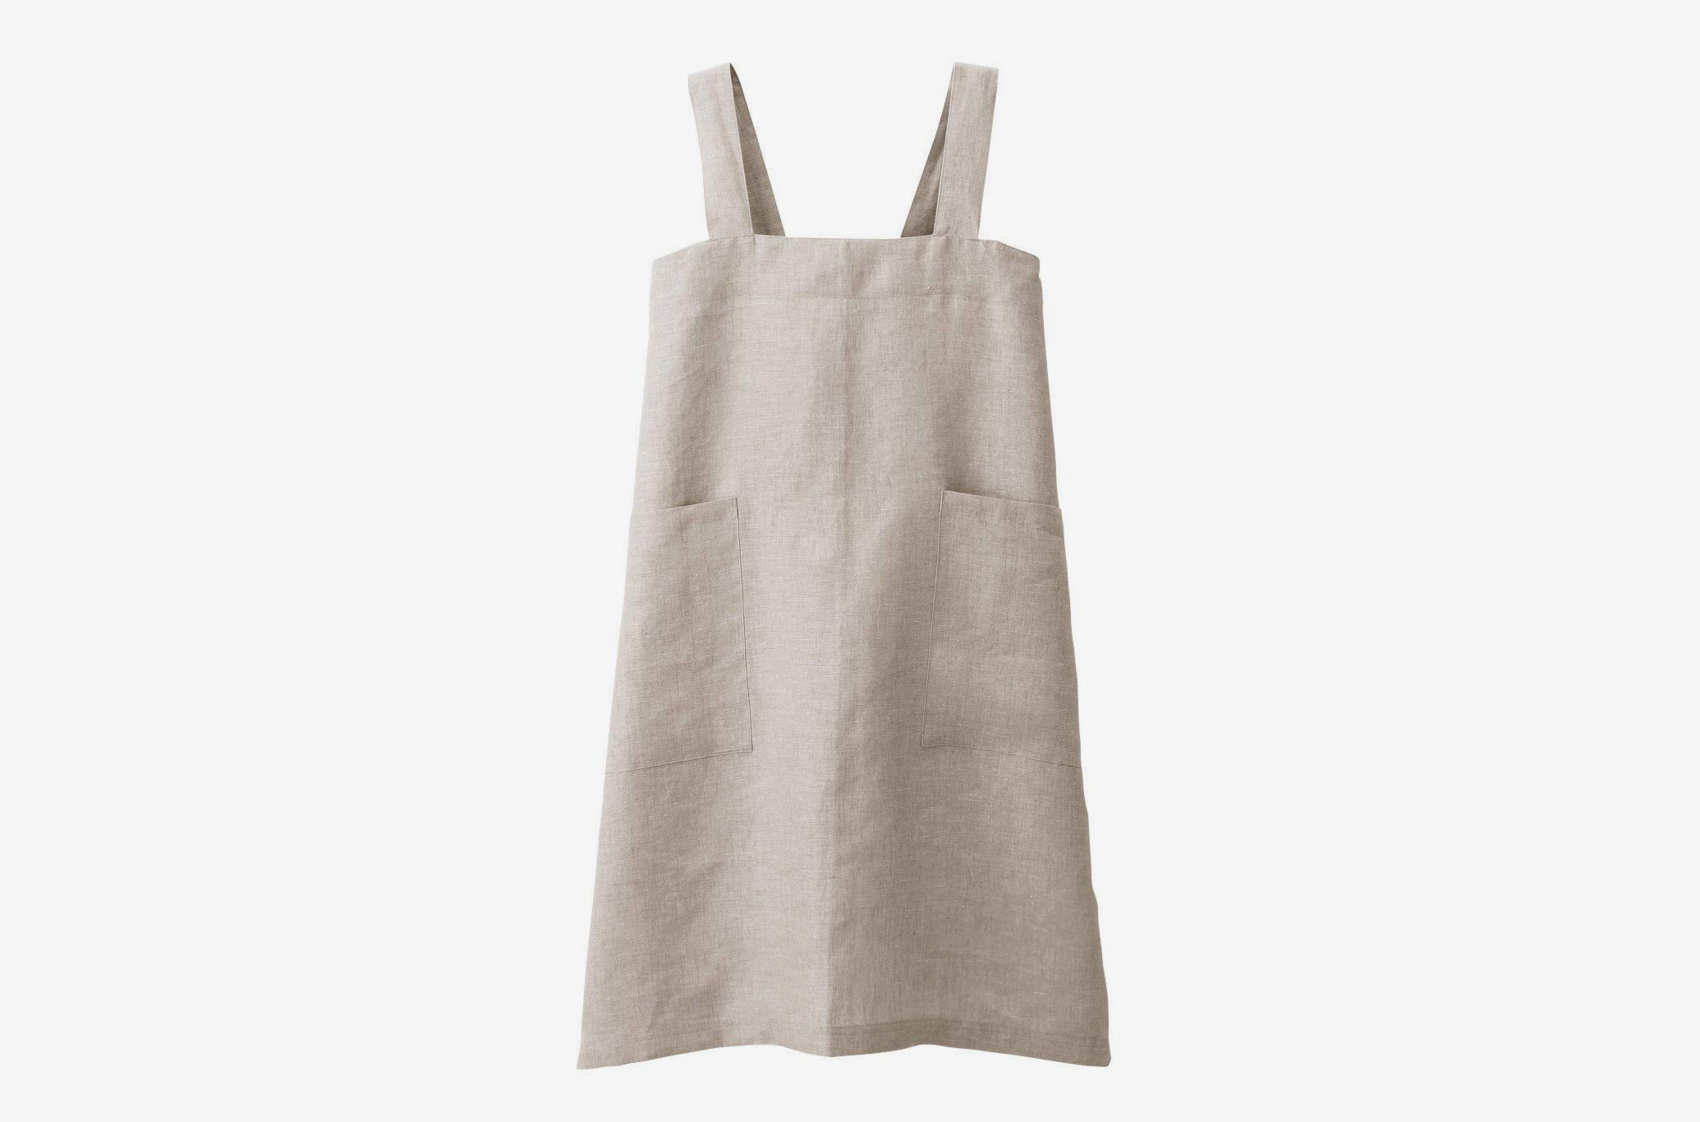 The Best Aprons for Cooking, Reviewed by Chefs 2018